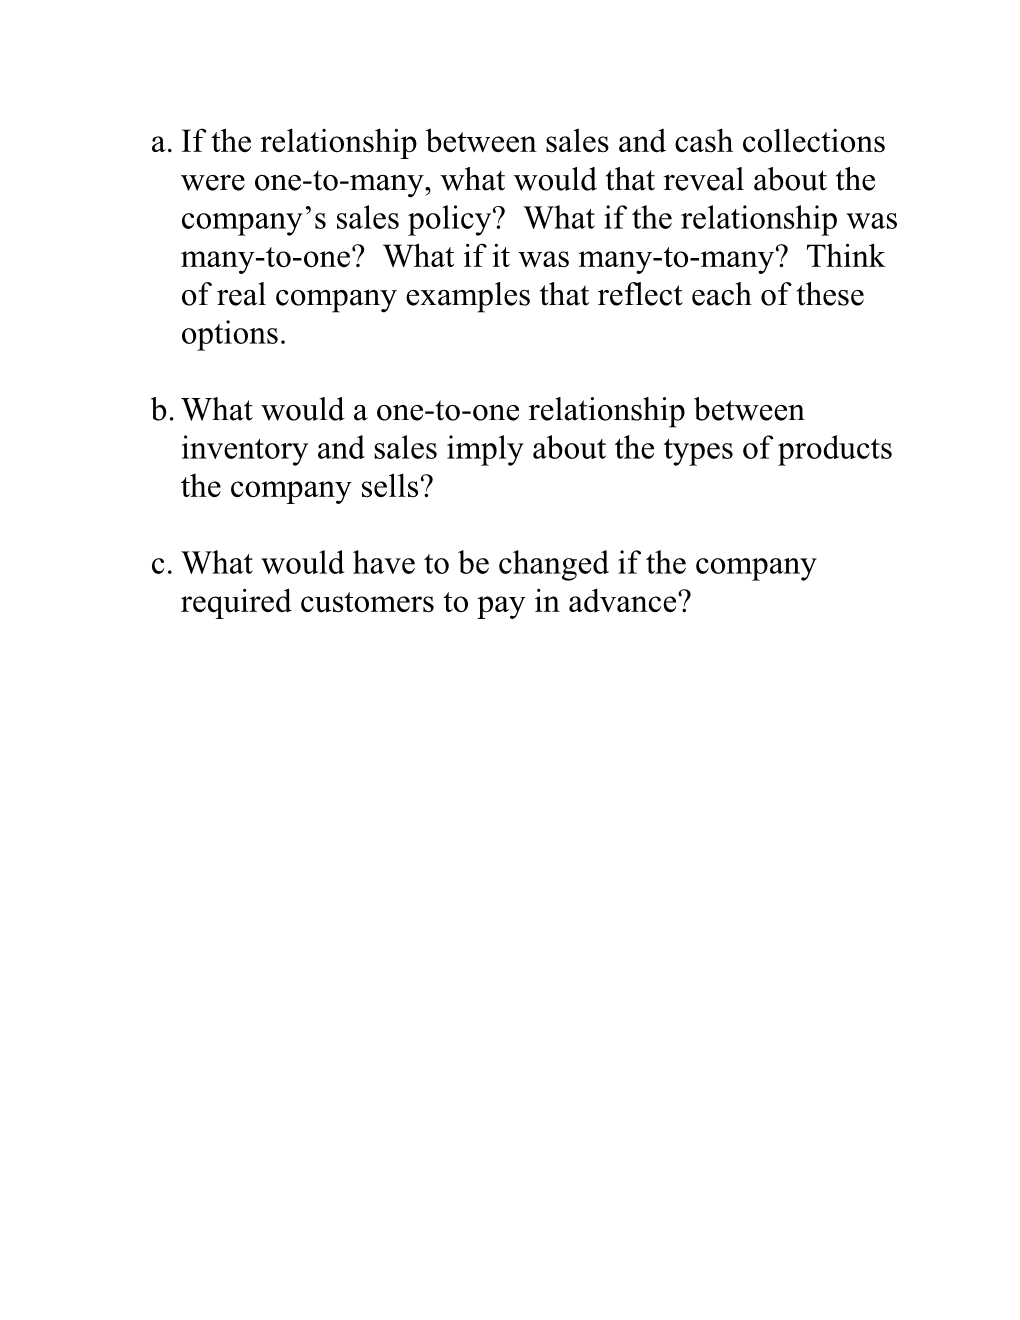 What Would Have to Be Changed If the Company Required Customers to Pay in Advance?